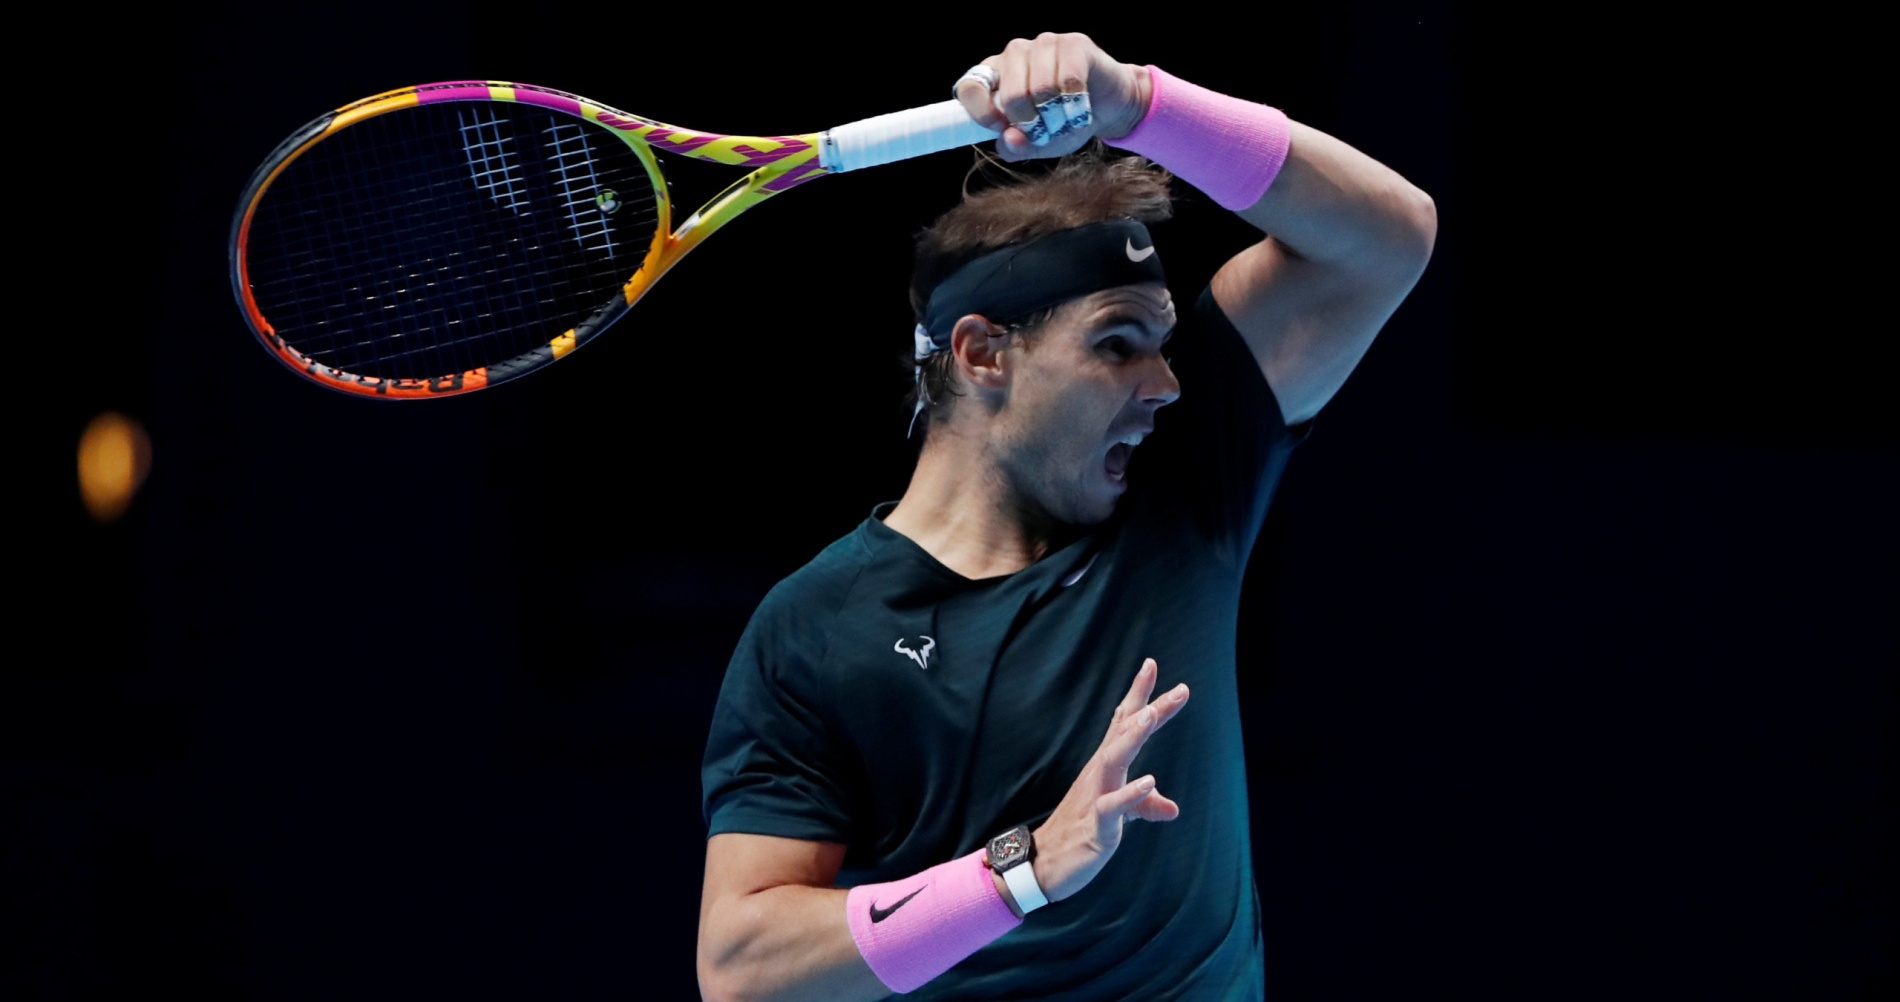 I lost a big opportunity” - Rafael Nadal on another ATP Finals that got away